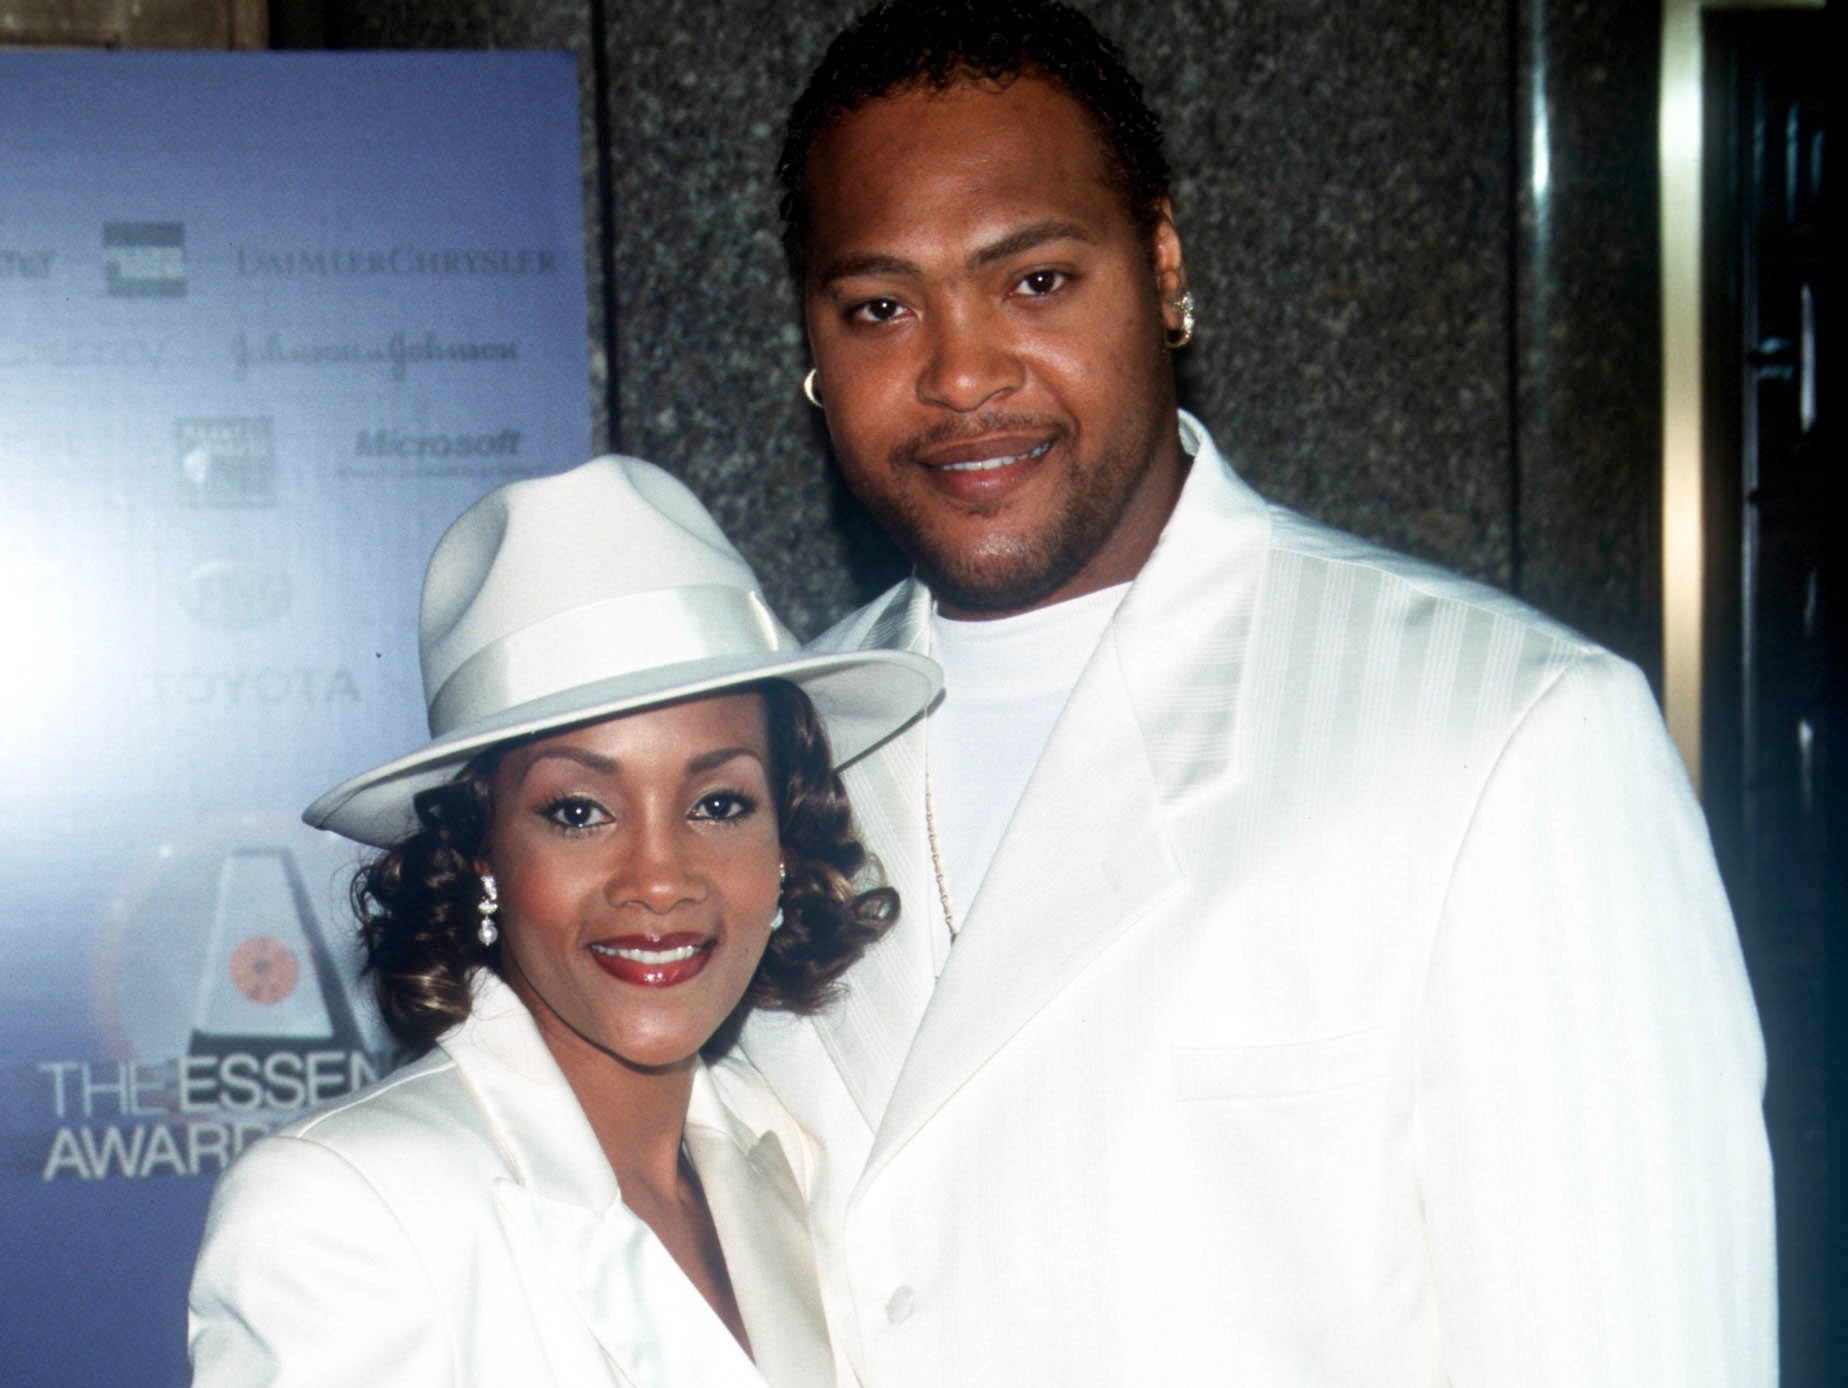 Vivica A. Fox Looks Back On First Marriage, Says She Ended It Because "I Didn't Want To Be The Breadwinner"